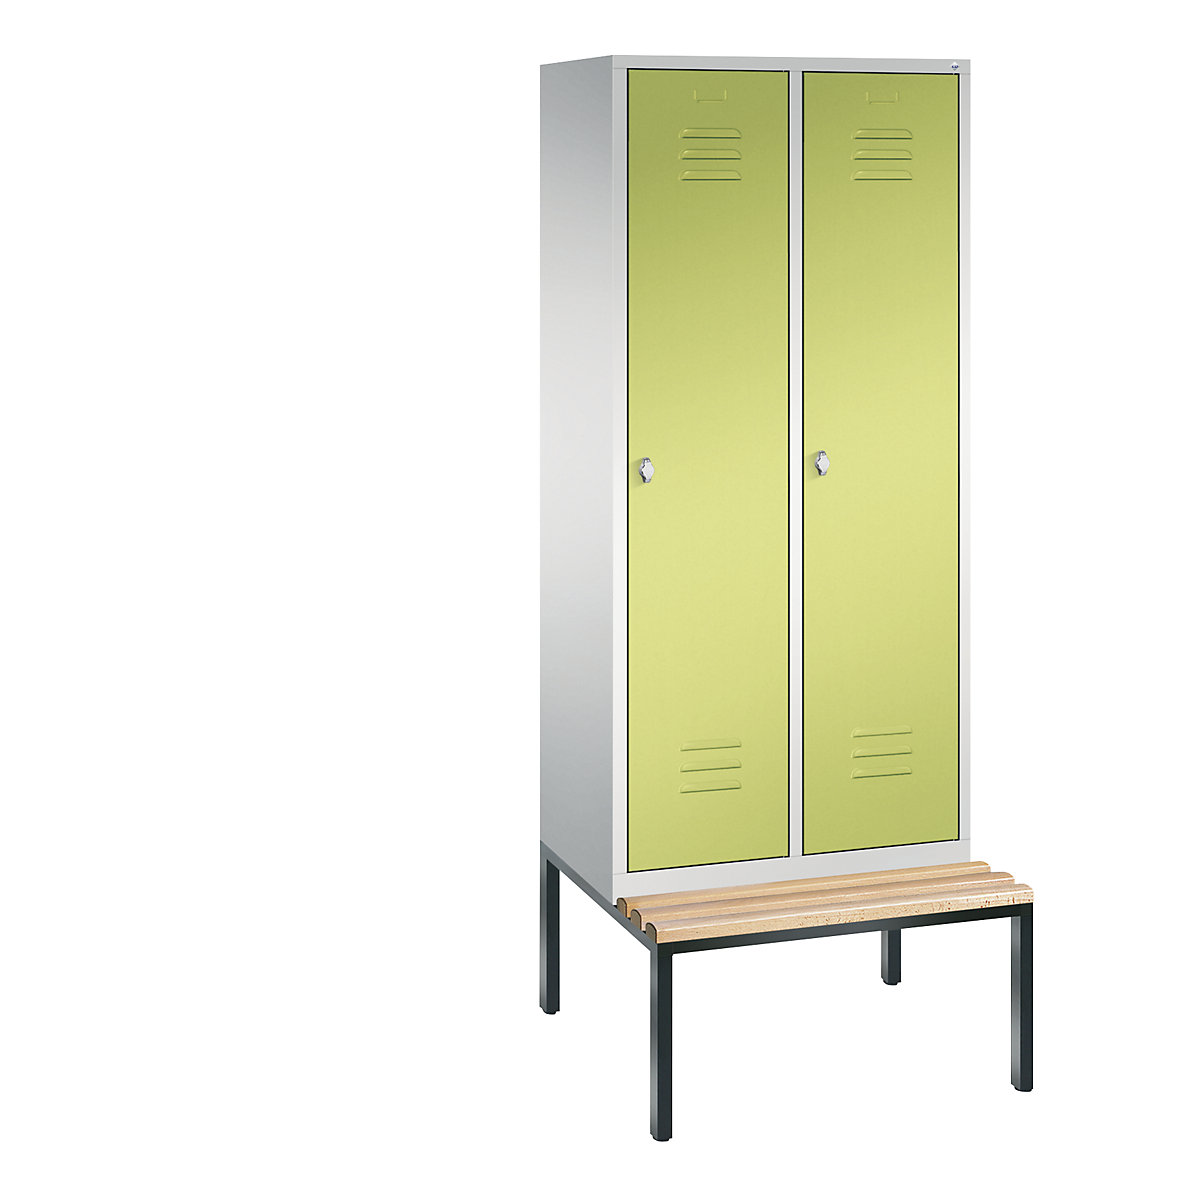 CLASSIC cloakroom locker with bench mounted underneath – C+P